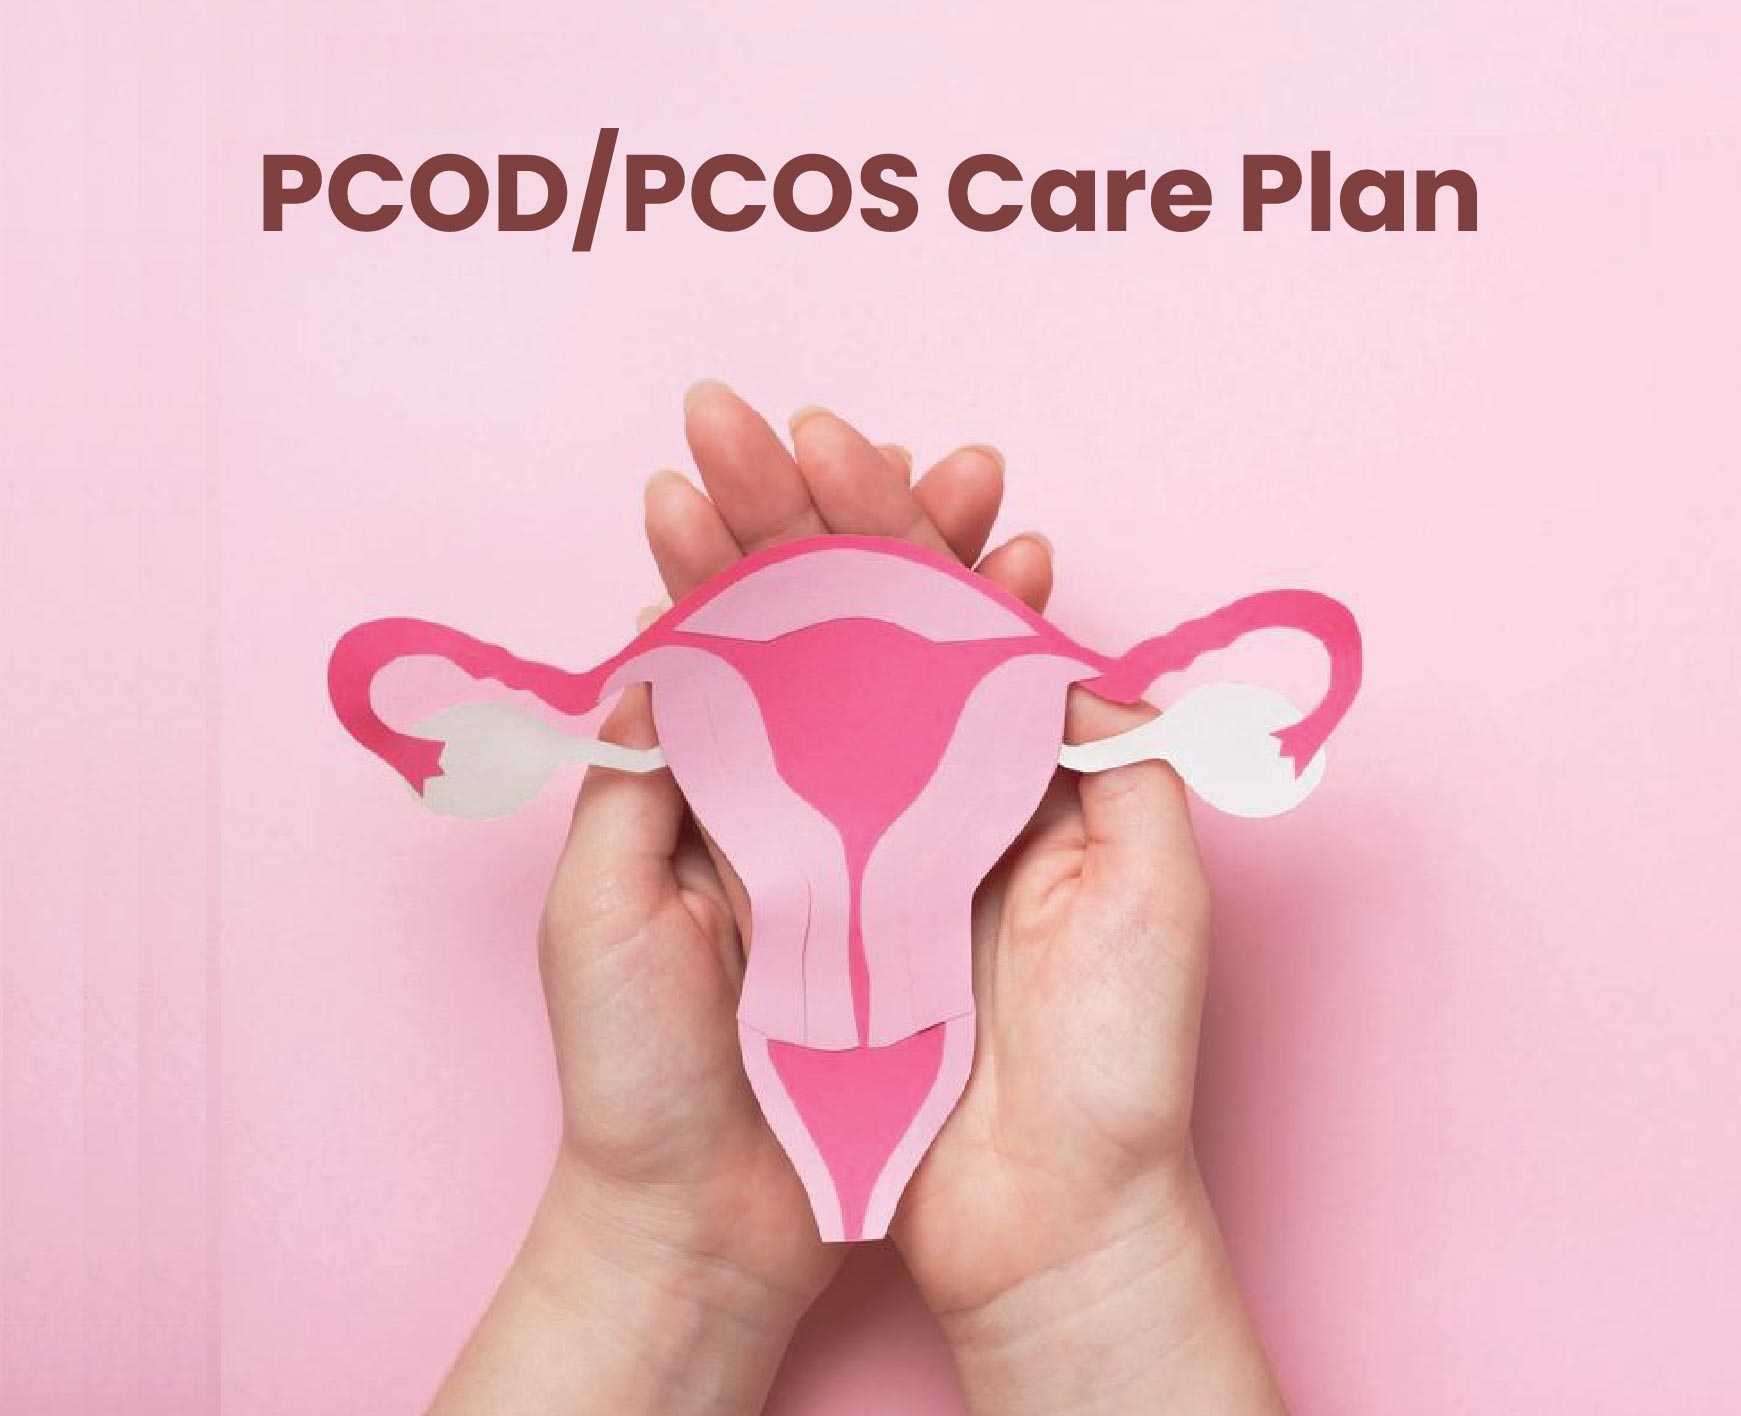 Customized PCOS/PCOD Care Plan by Toneop: fitness app